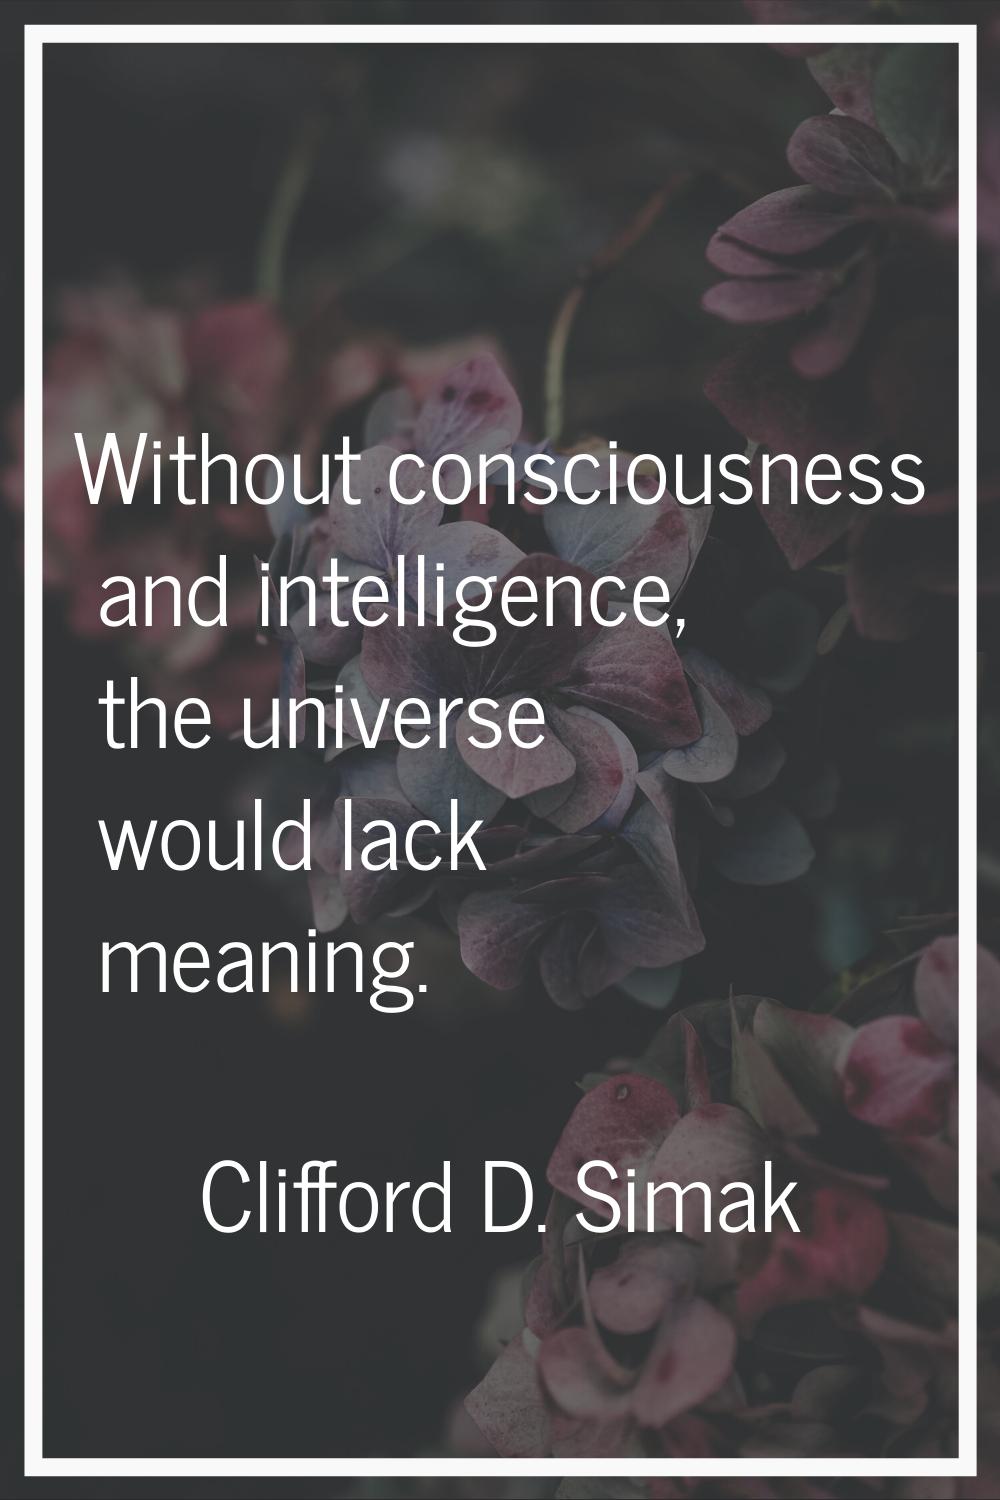 Without consciousness and intelligence, the universe would lack meaning.